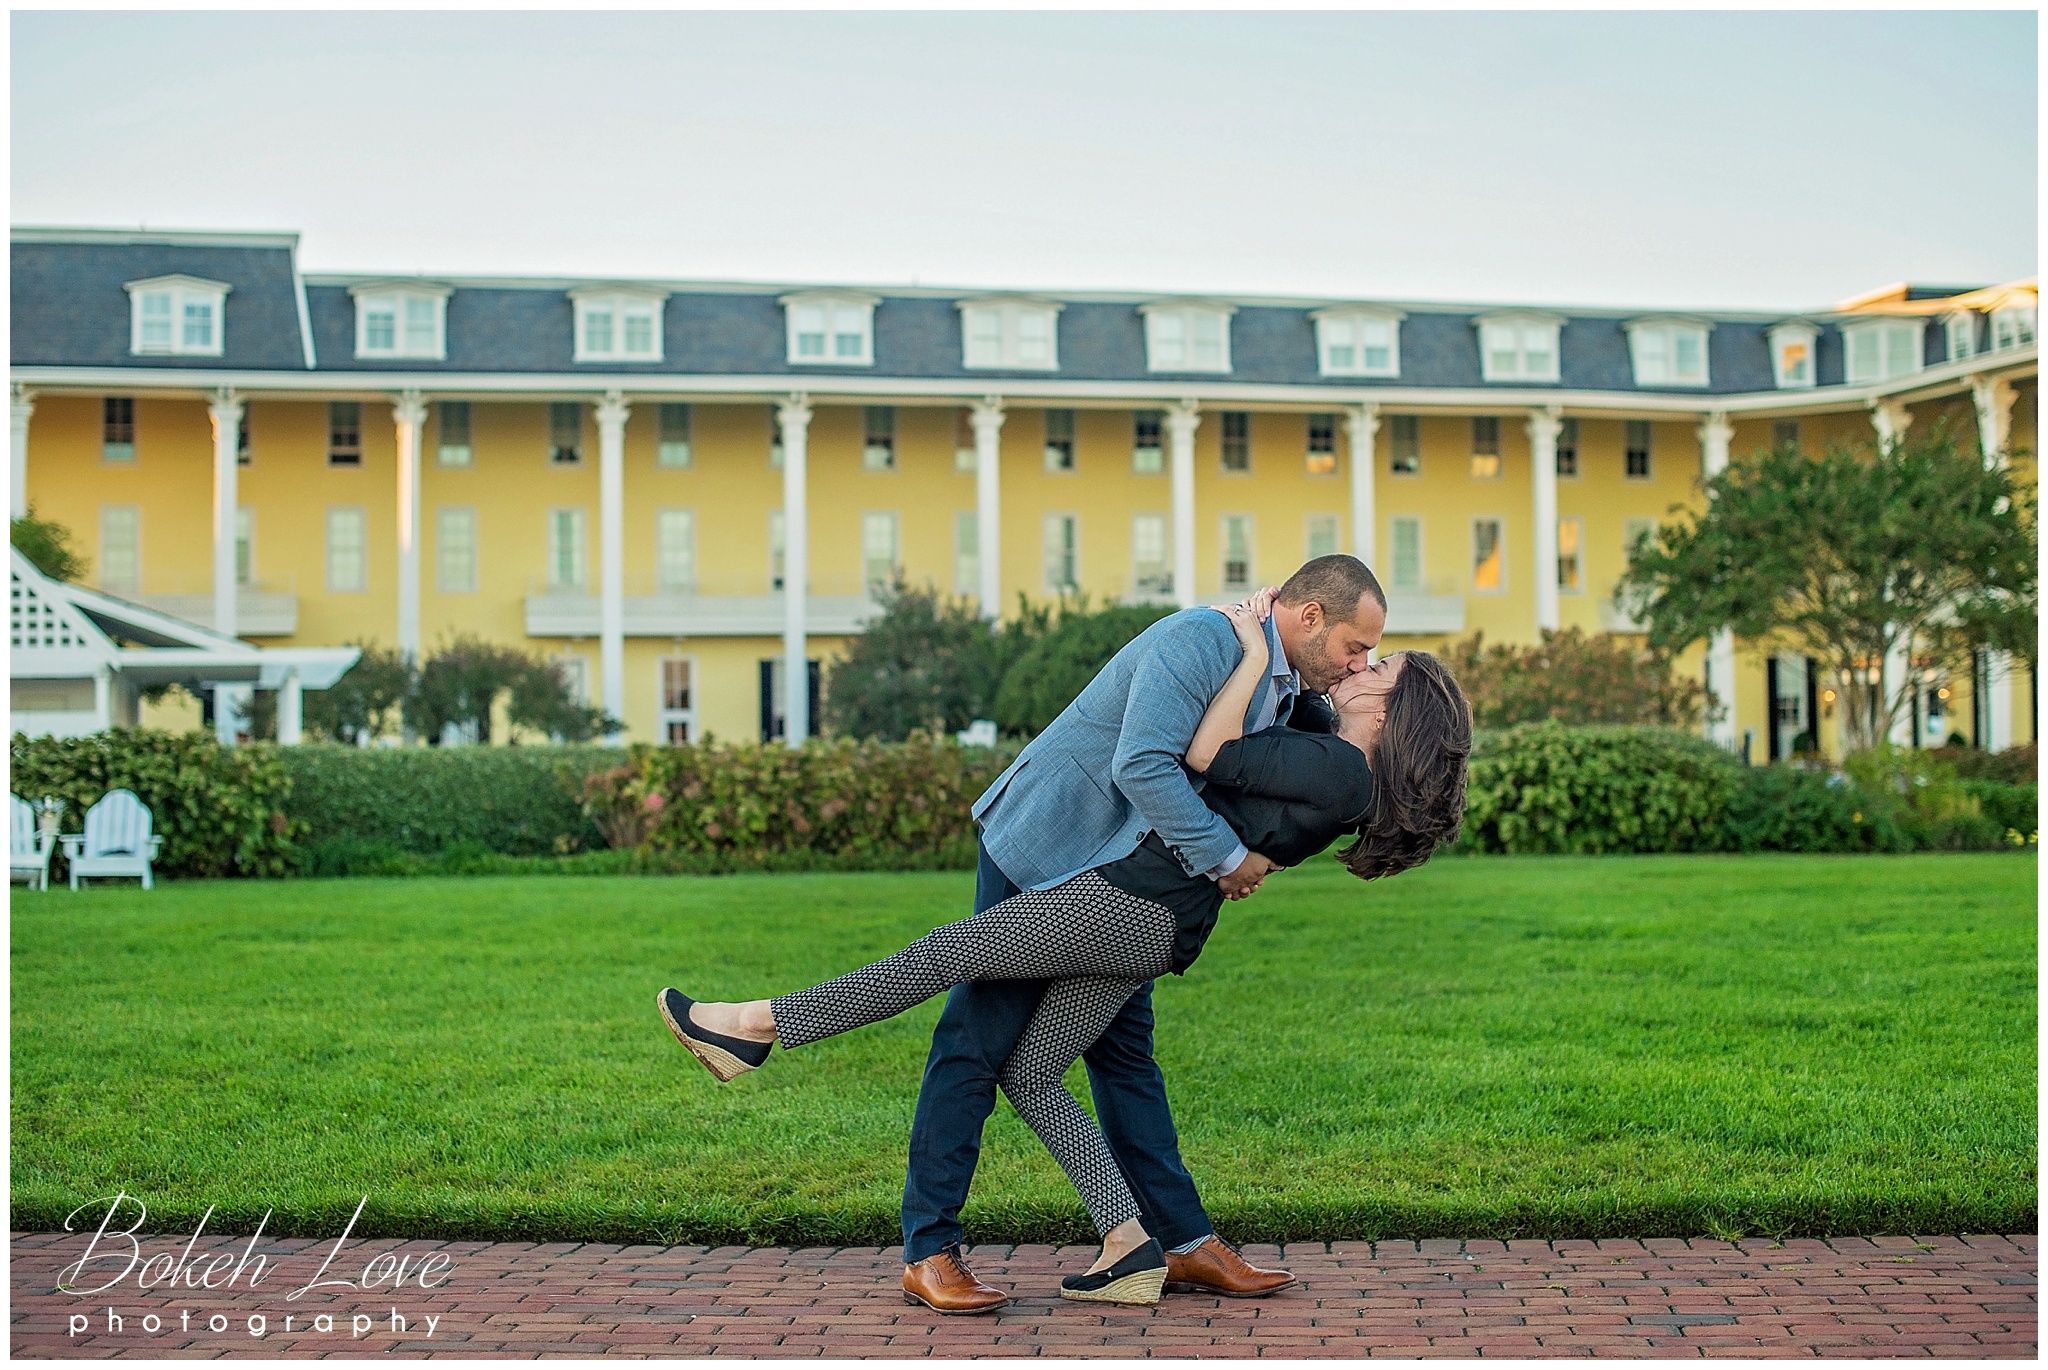 Congress Hall Marriage Proposal Cape May, NJ Bokeh Love Photography